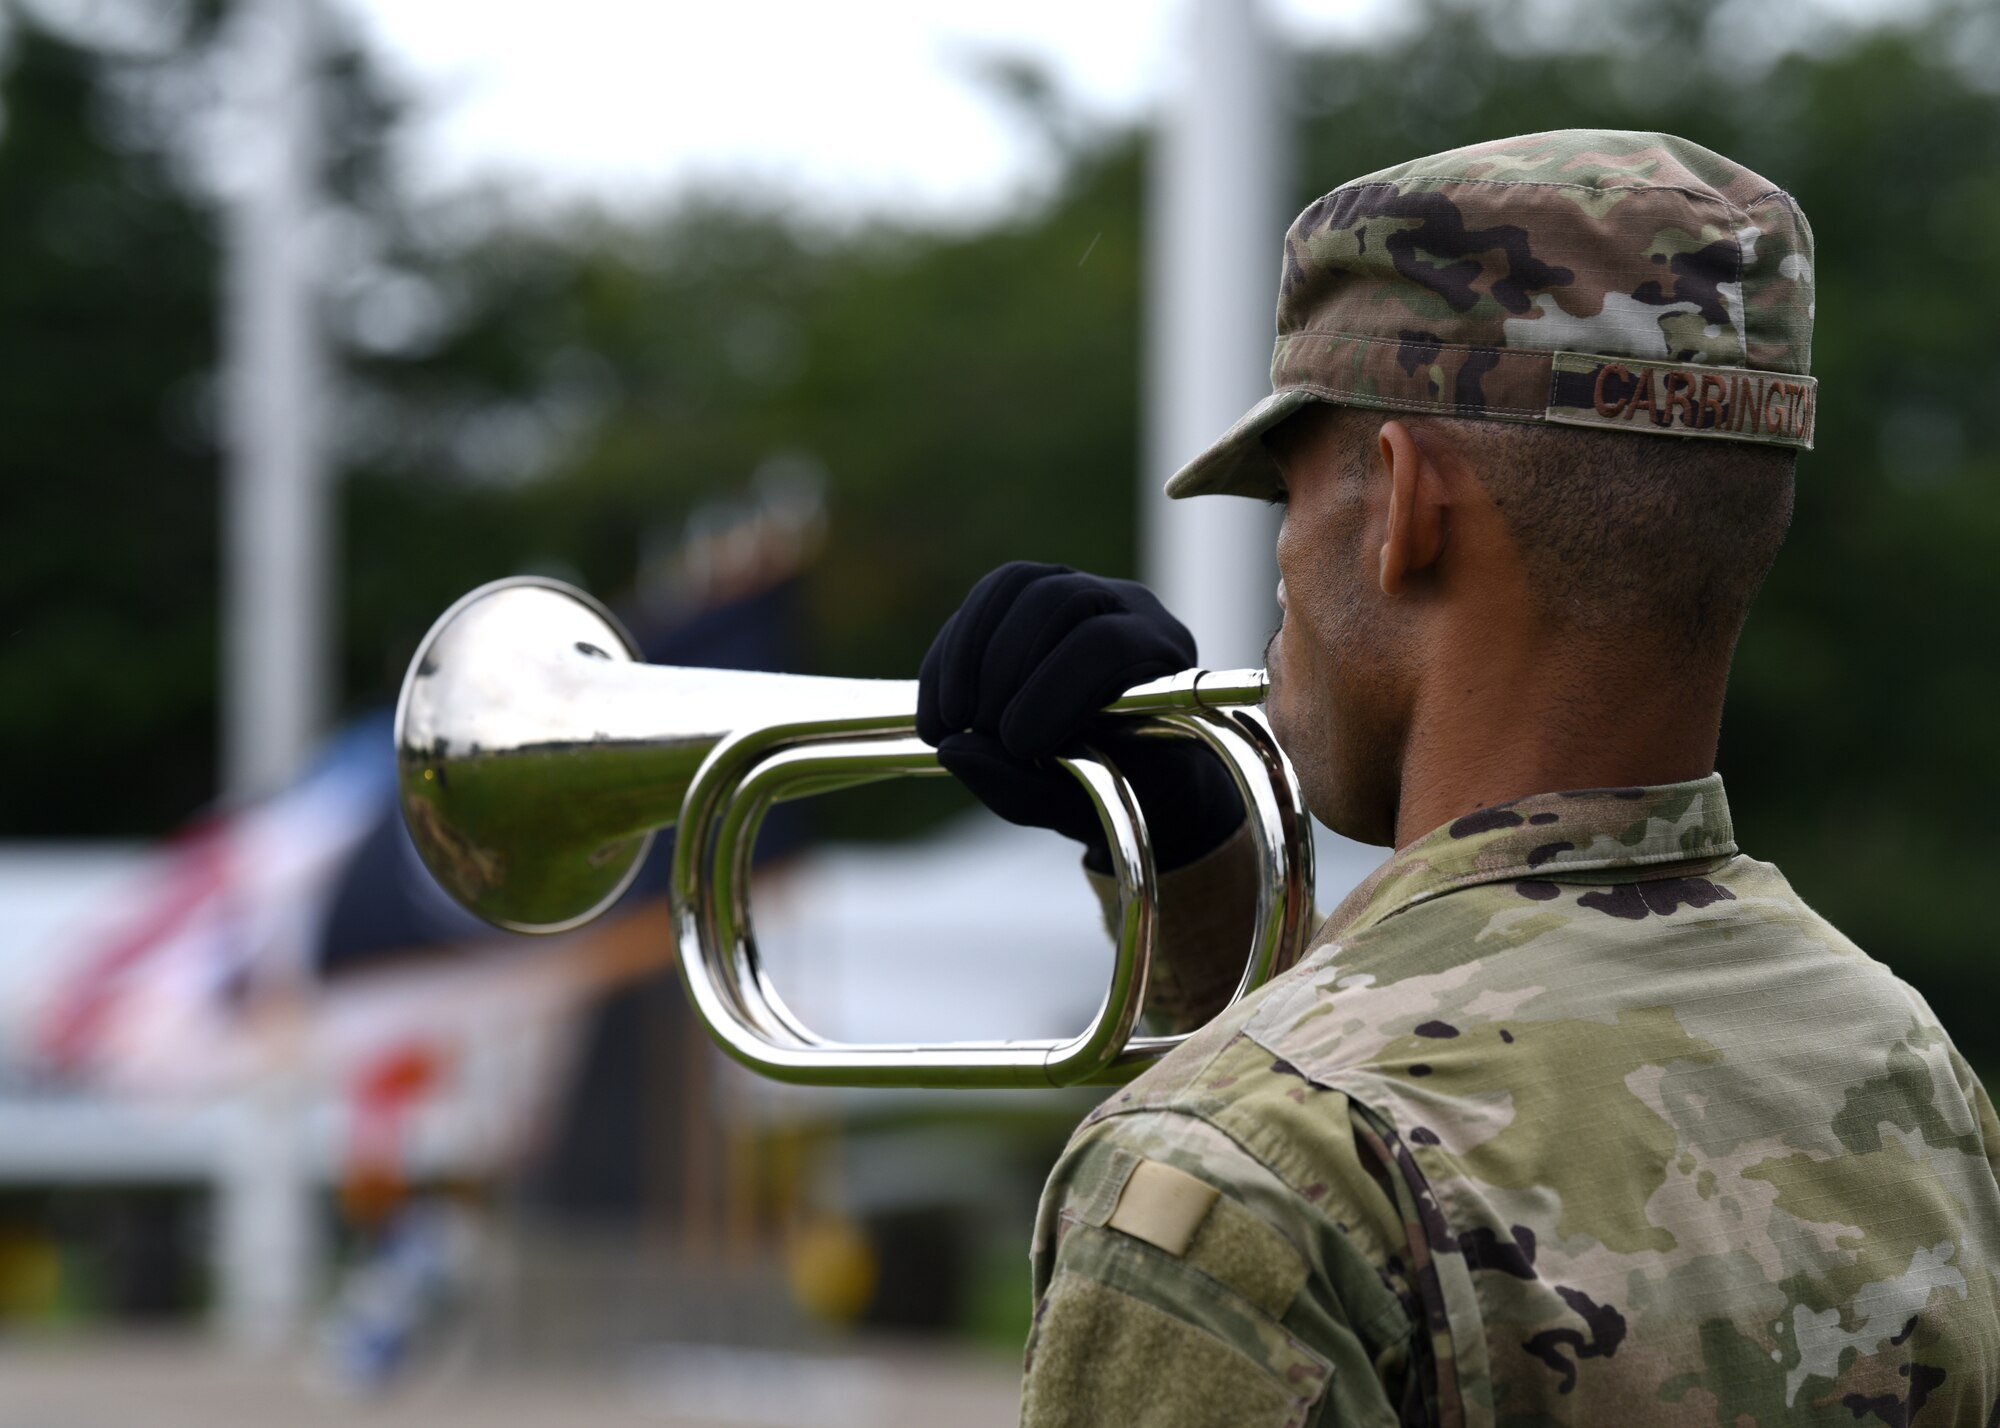 U.S. Air Force Staff Sgt. Murtadiy Carrington, 35th Force Support Squadron Honor Guard bugle player, performs Taps during the POW/MIA Ceremony at Misawa Air Base, Japan, Sept. 18, 2020.  Since World War I, approximately 83,400 U.S. service members are still unaccounted for, and more than 150,000 Americans have been held as prisoners of war. (U.S. Air Force photo by Staff Sgt. Grace Nichols)